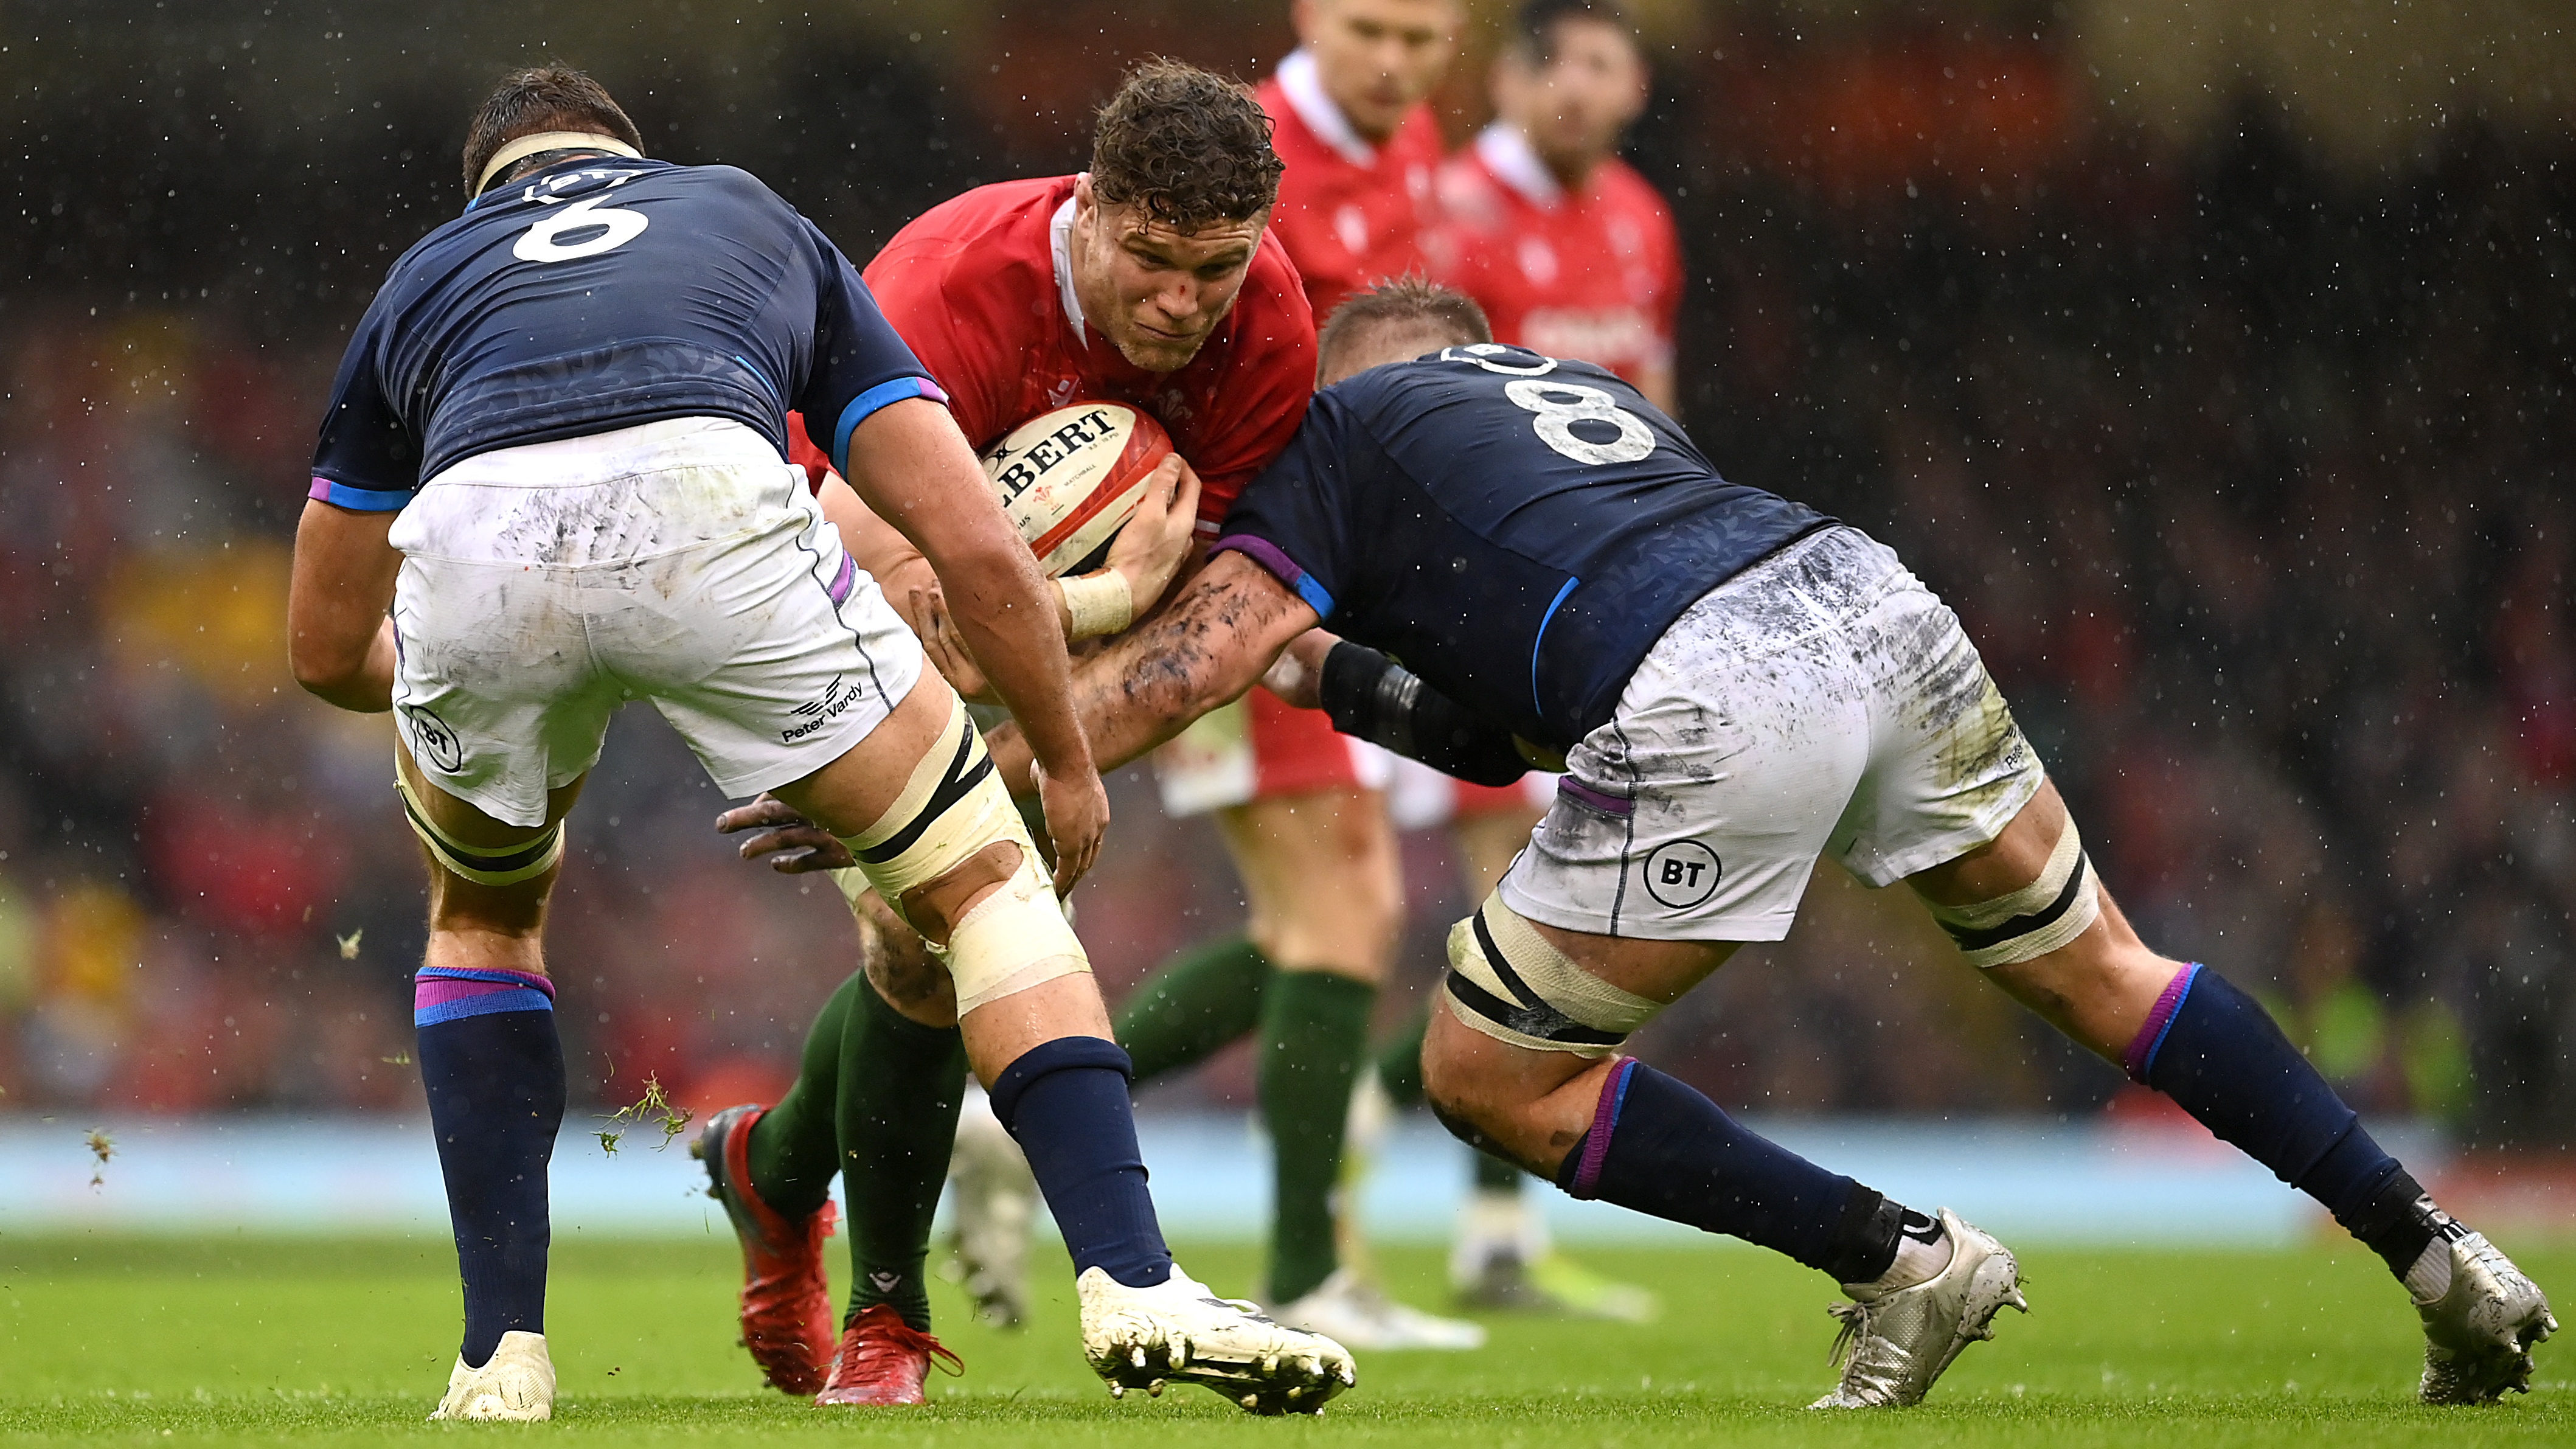 Scotland vs Wales live stream how to watch the Six Nations online from anywhere TechRadar